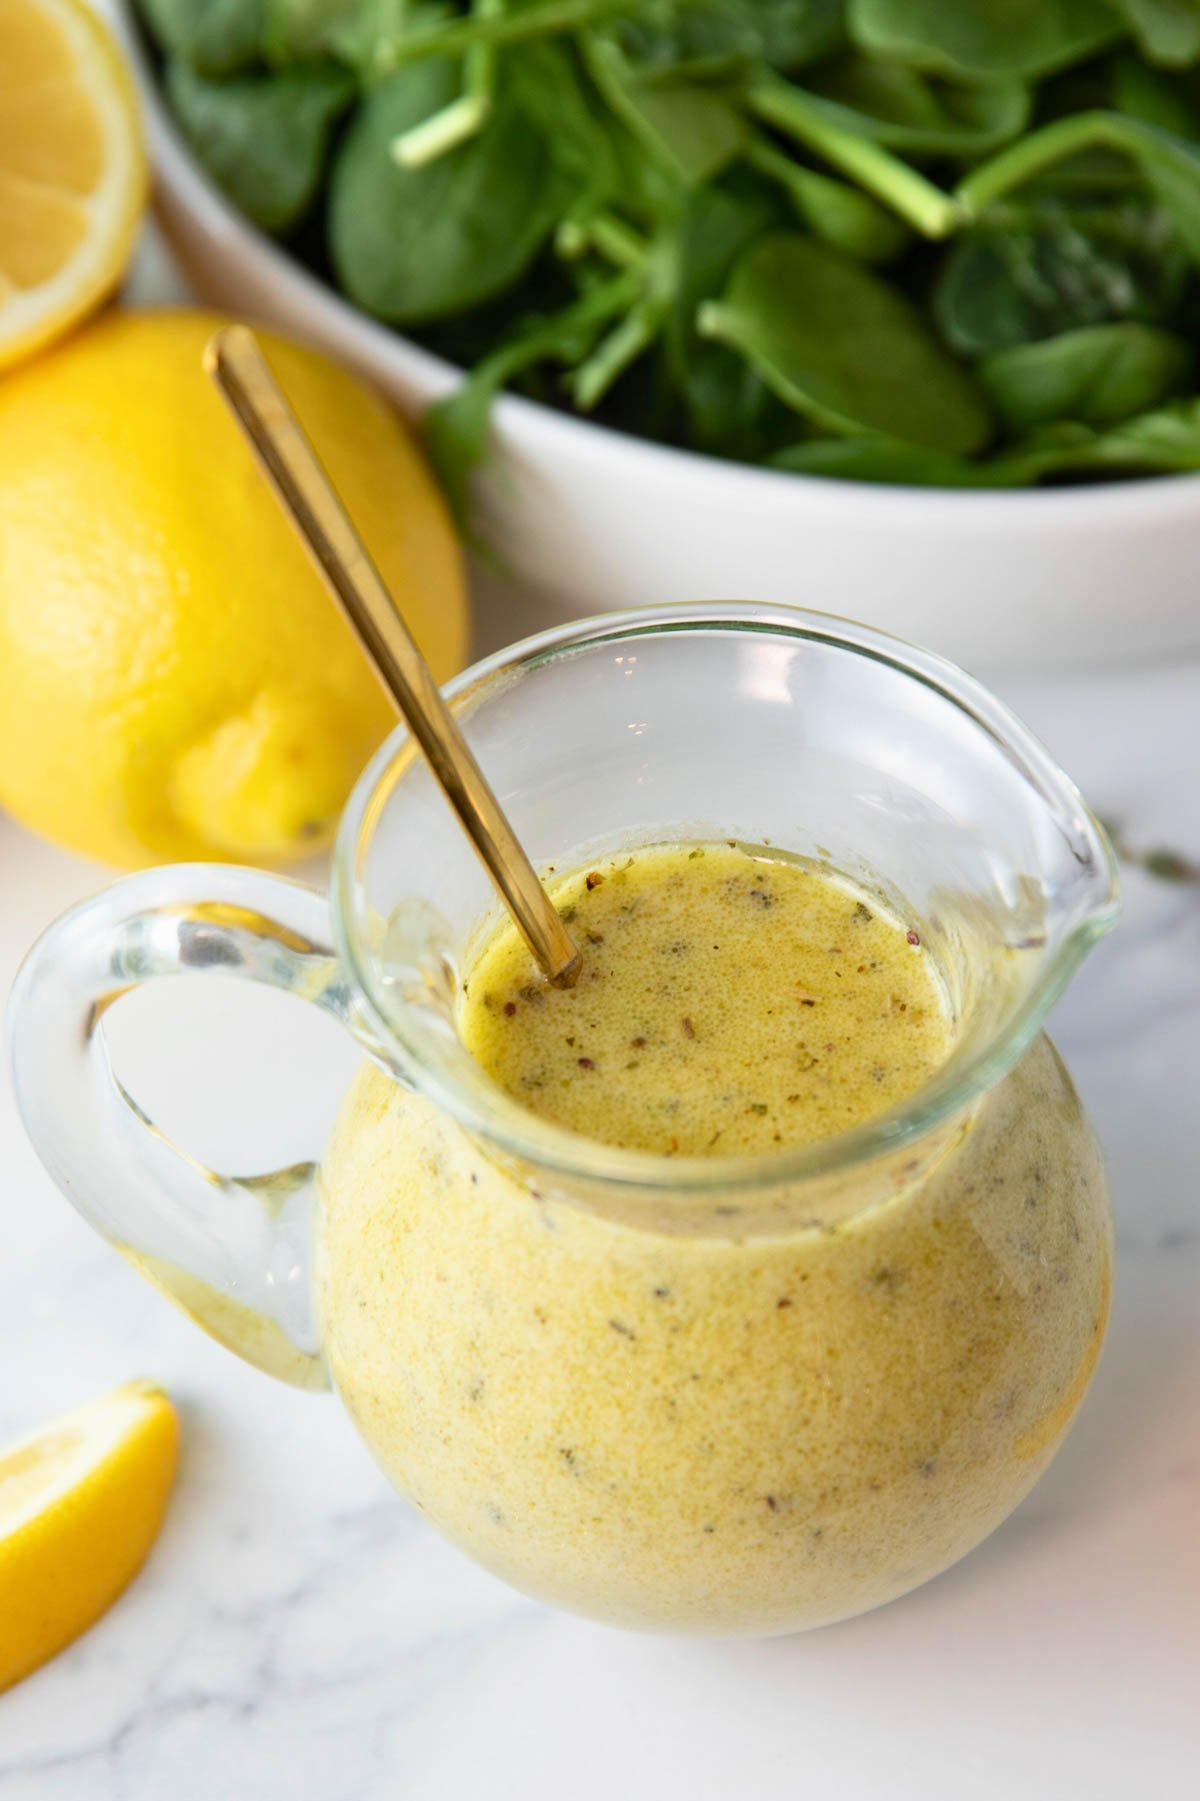 Jar of lemon vinaigrette dressing with bowl of spinach and lemons sitting in background